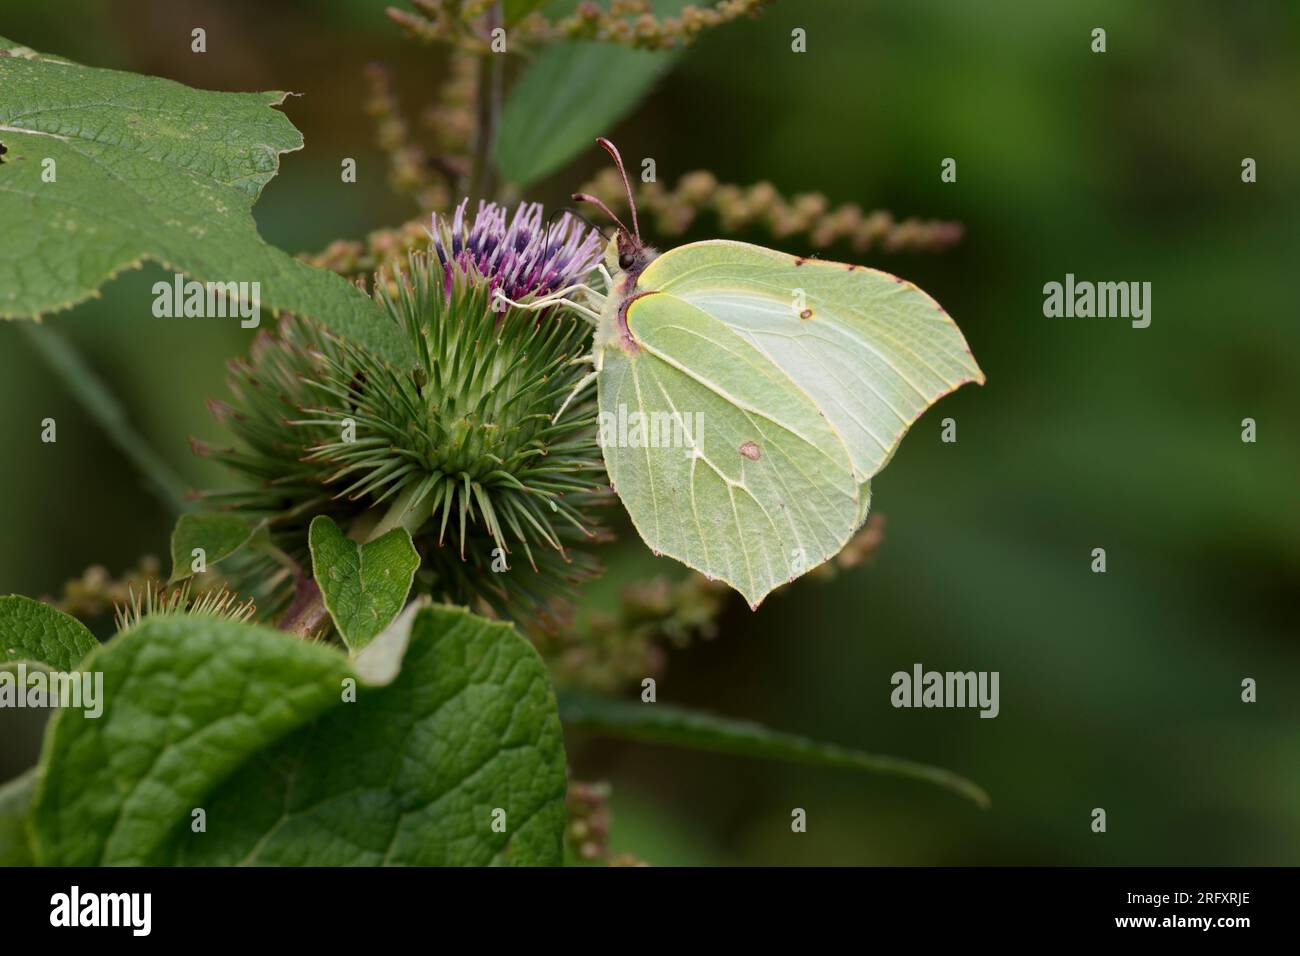 Brimstone butterfly Gonepteryx rhamni, yellow male brighter female greener leaf shaped wings grey body brown spots on underwings perched on vegetation Stock Photo